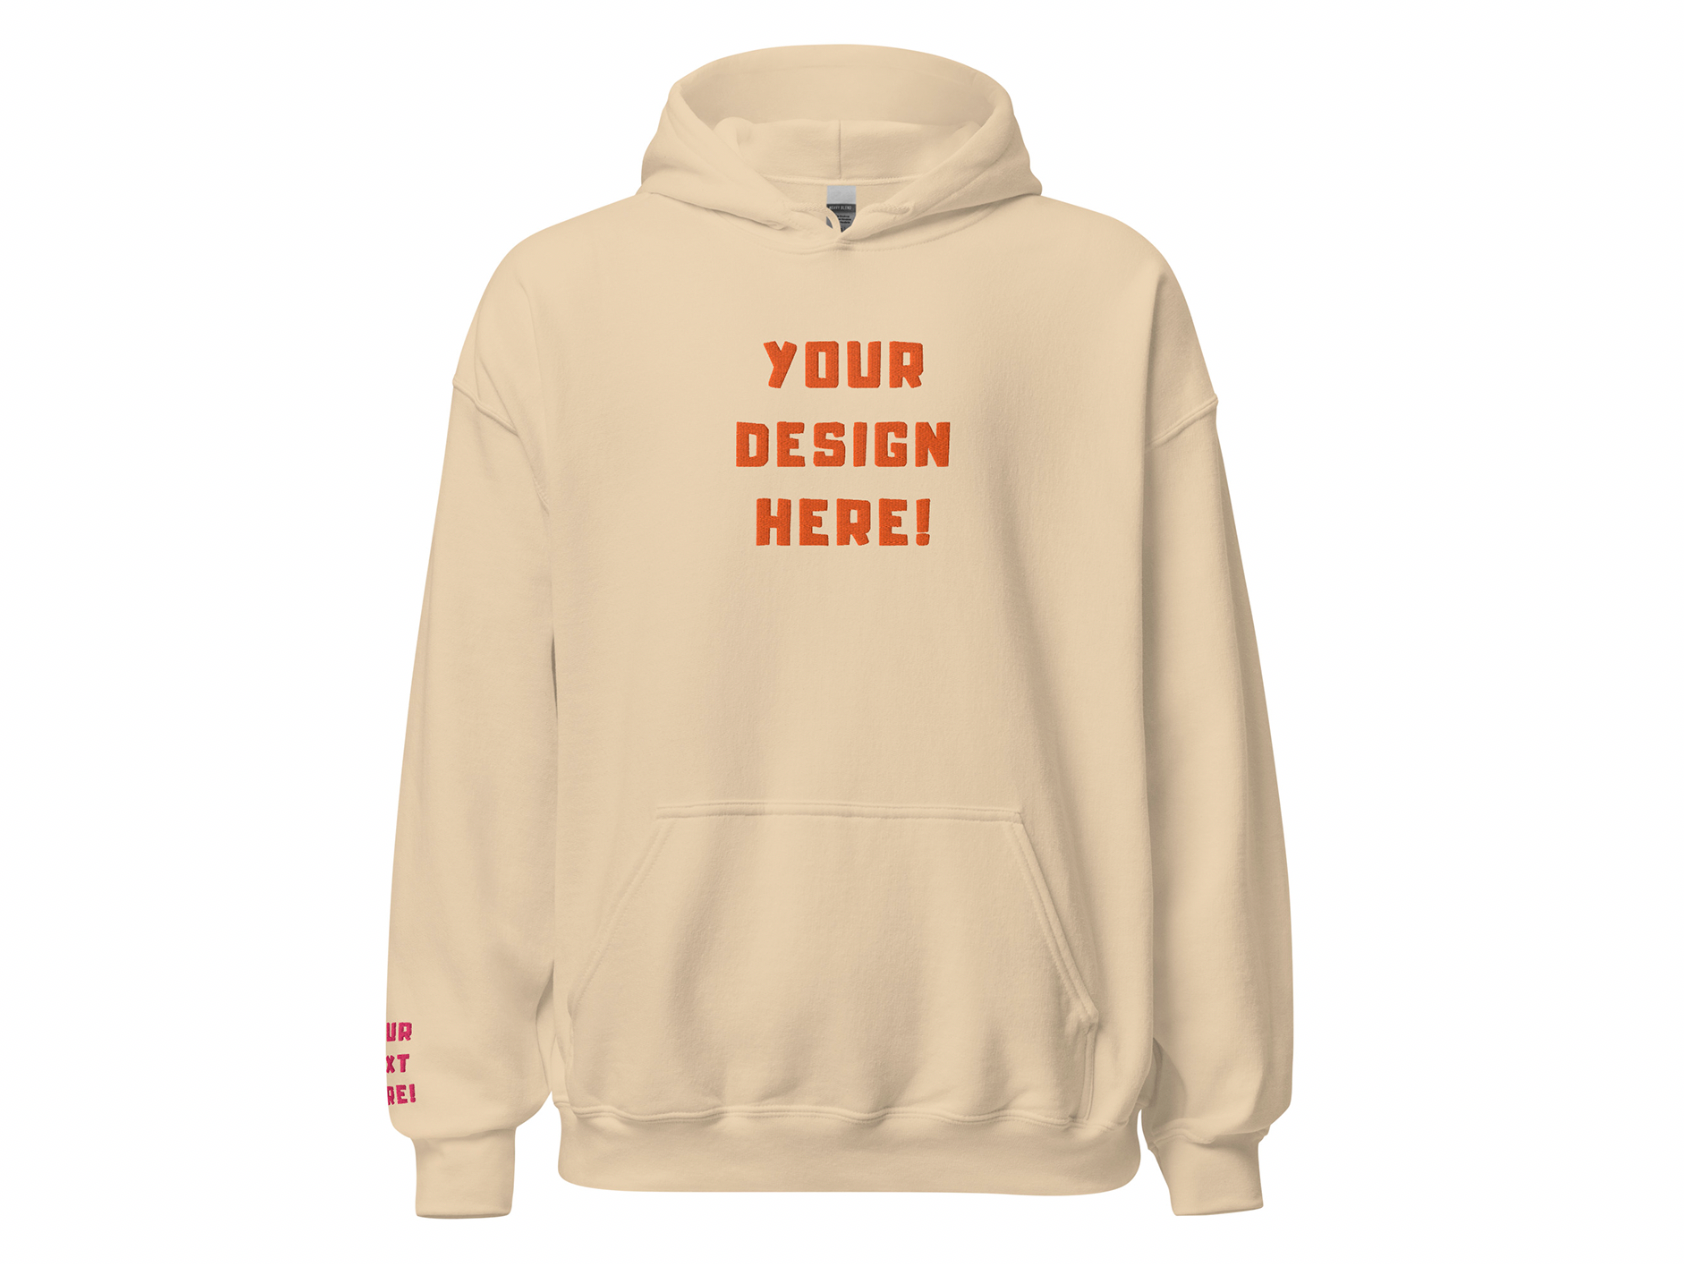 Custom adults embroidered sand hoodie. Sleeve text is customizable. 